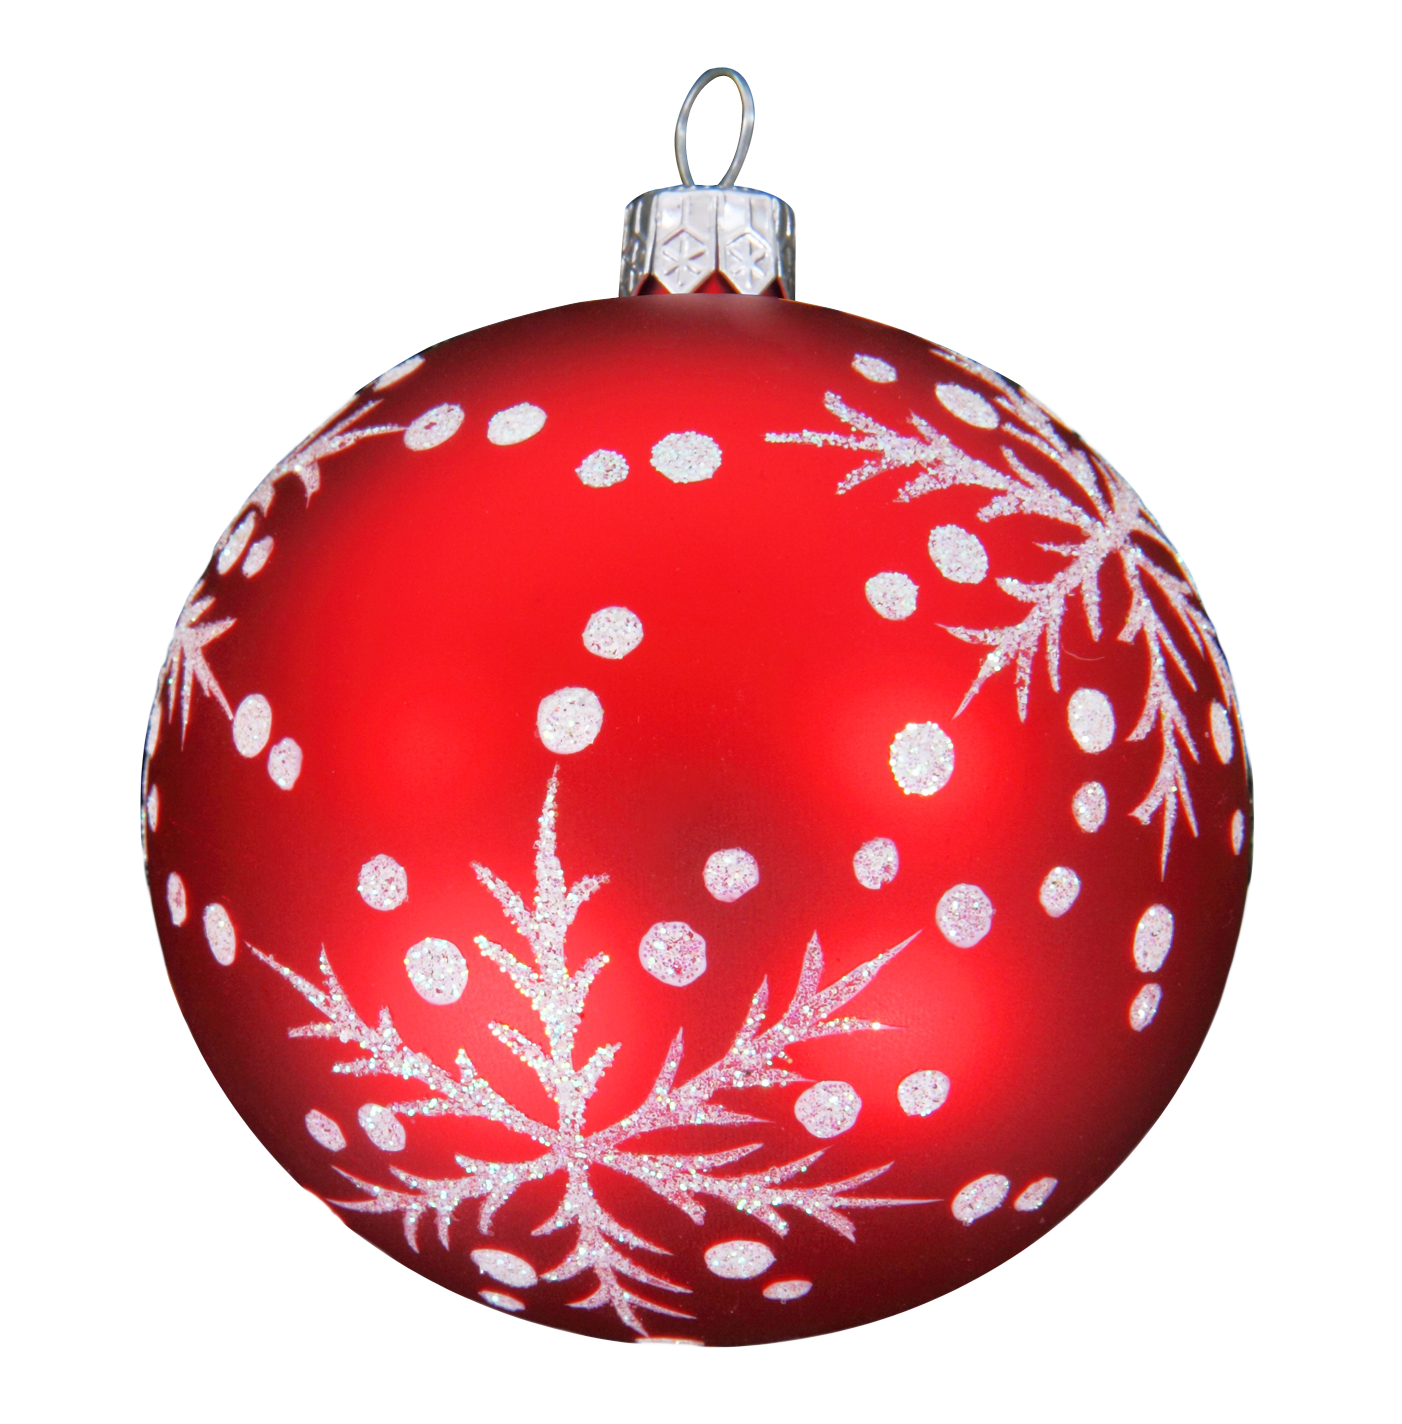 Decorated Christmas Ball PNG Free Image